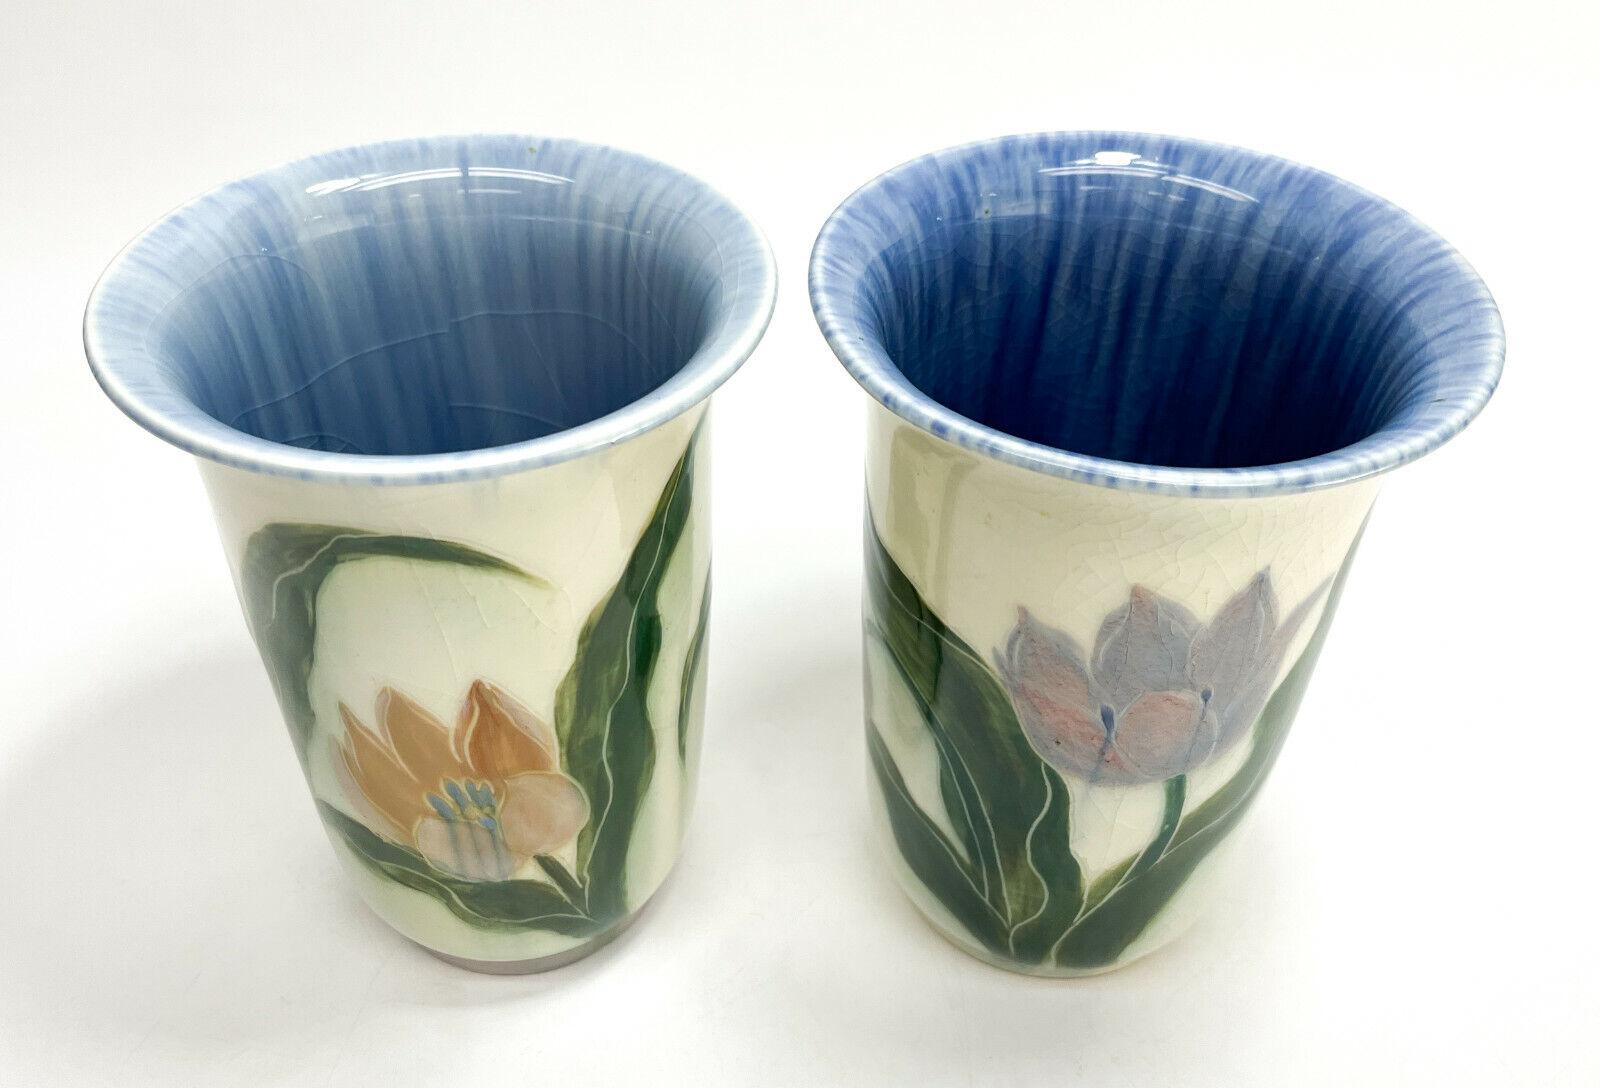 Pair of rookwood pottery vases by E.T. Hurley #6806, hand painted tulips, 1943.

Hand painted orange and purple tulips throughout the exterior with a blue interior. Rookwood mark to the underside base.

Additional information:
Features: Hand